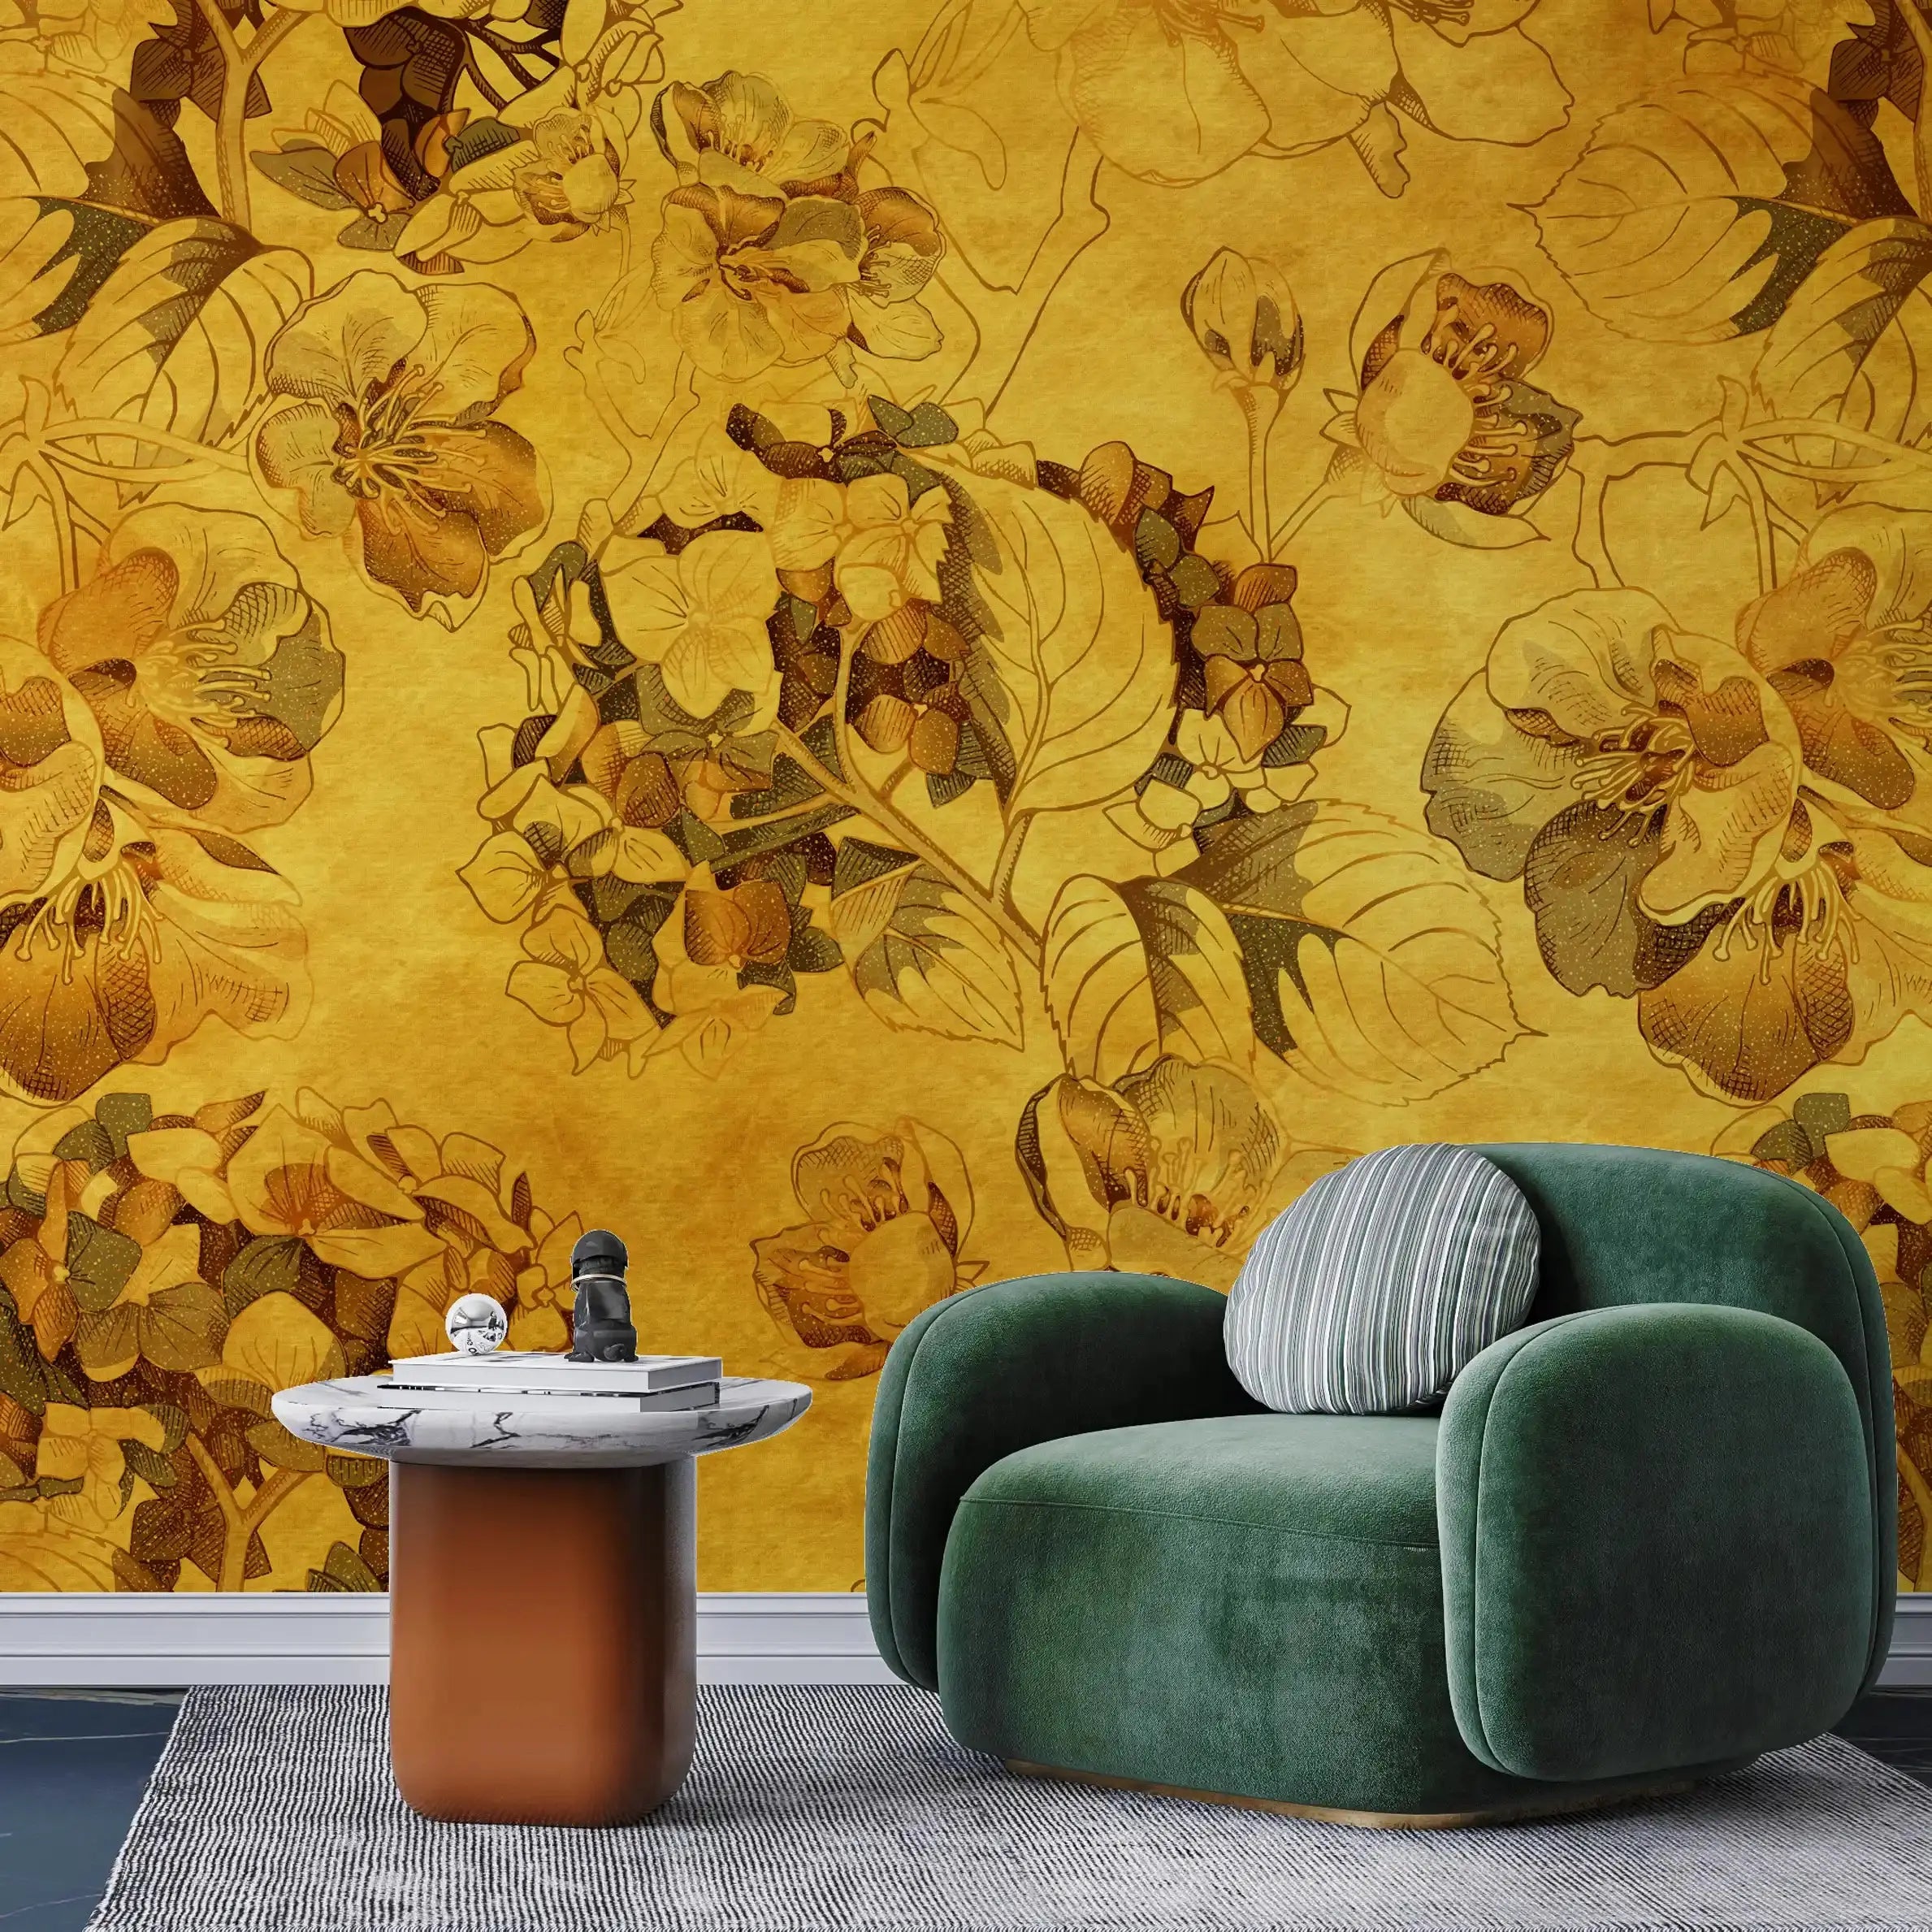 3036-A / Vintage Floral Mural Wallpaper: Yellow and Brown Art Style, Easy Install for Accent Wall Decor and Bathroom - Artevella